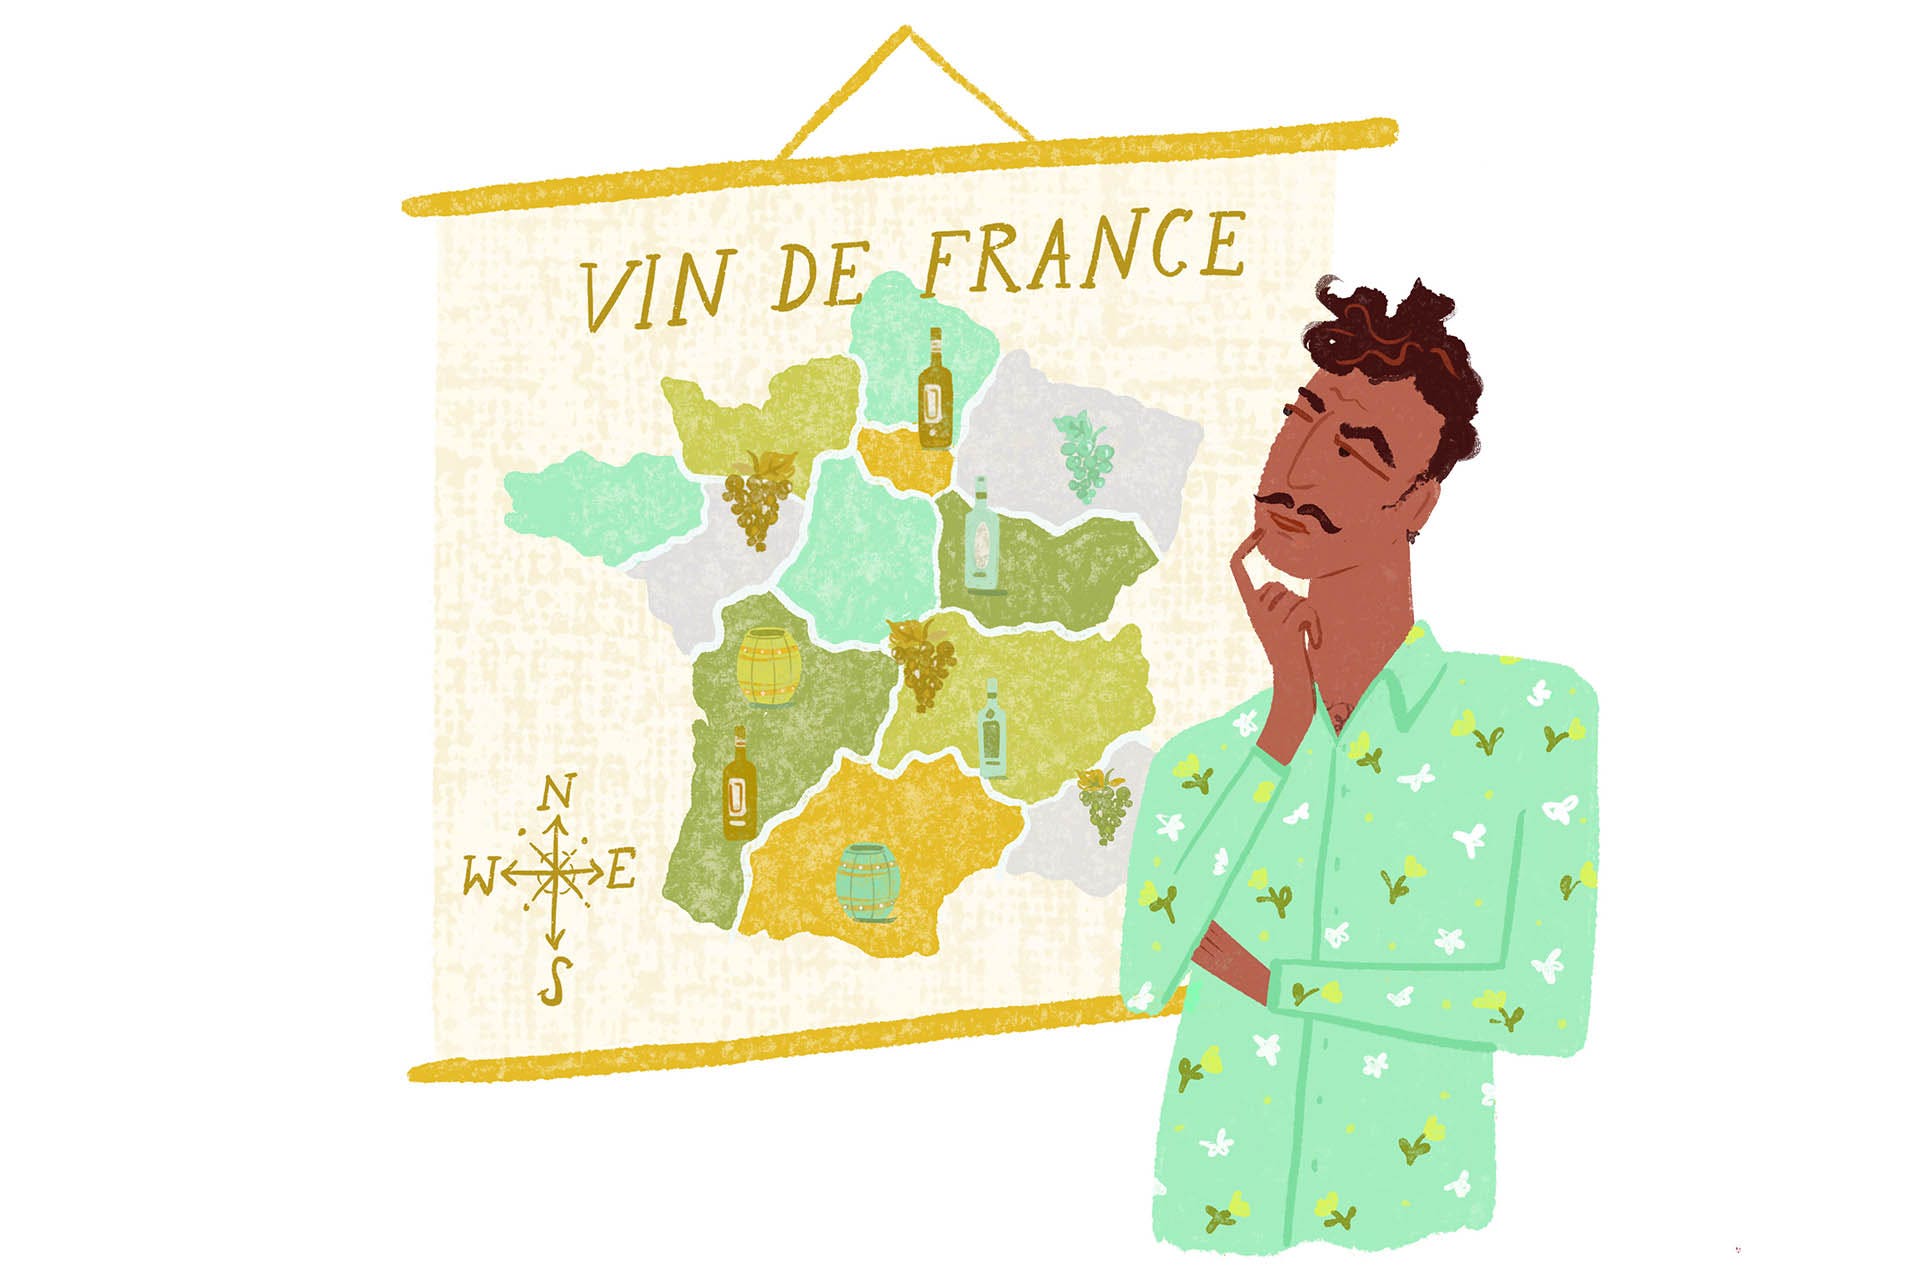 Illustration of man standing by map of French Wine Regions labeled Vin de France